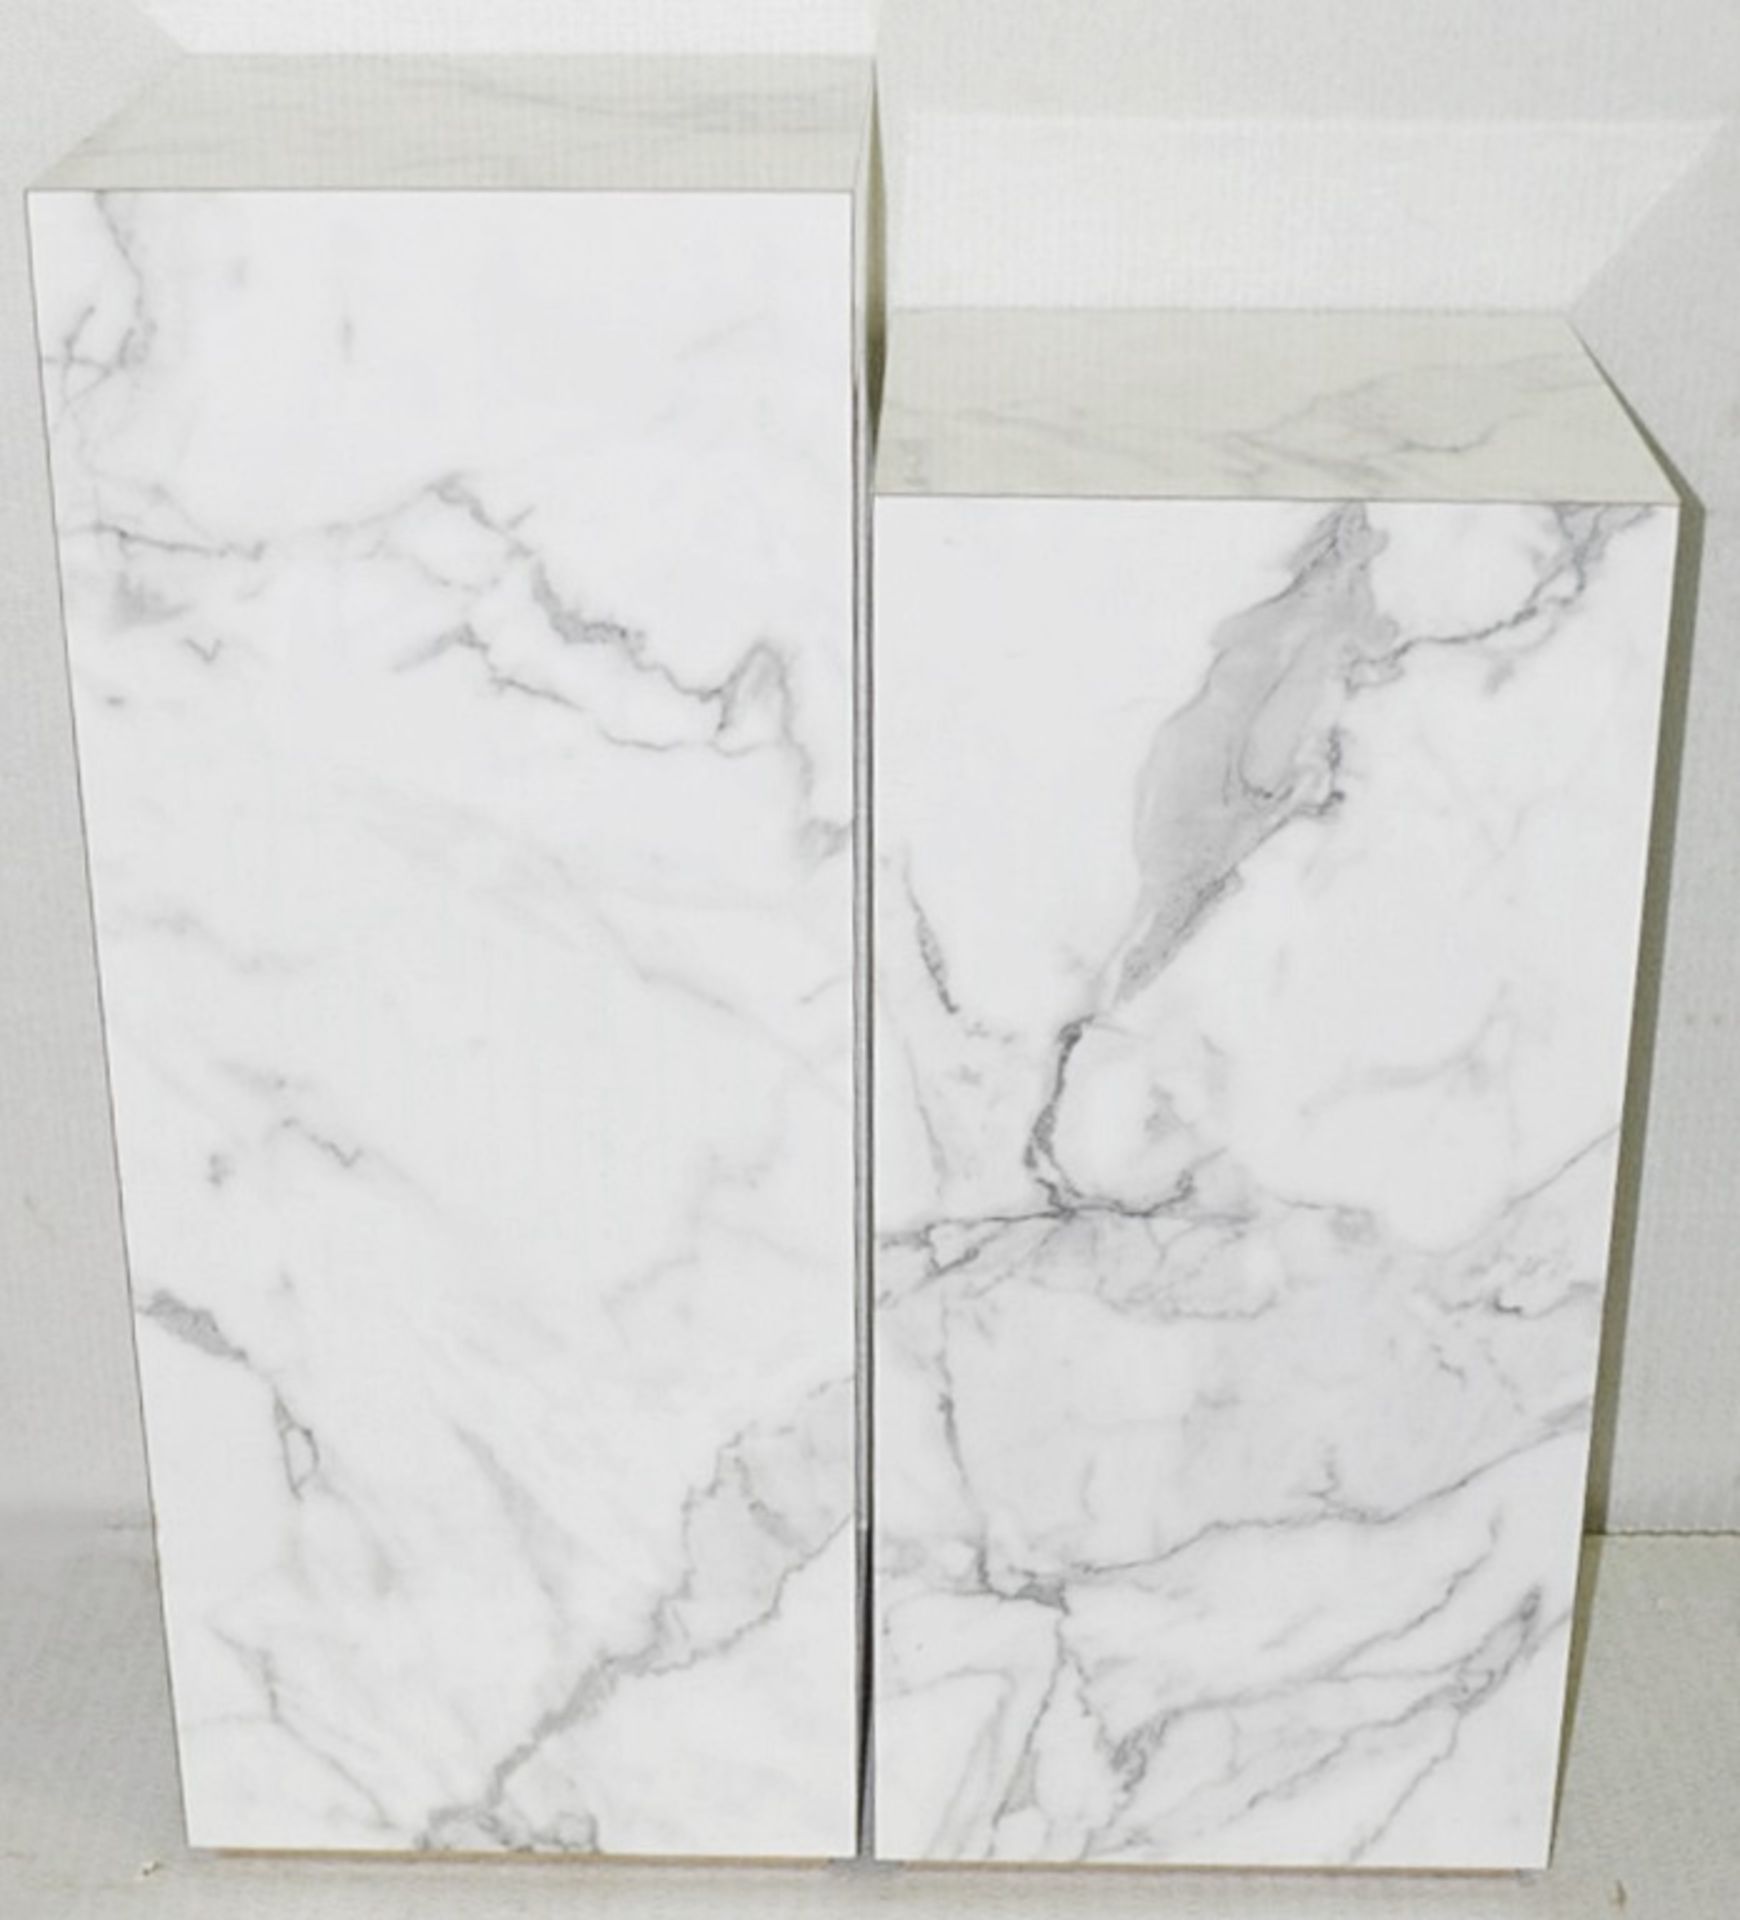 2 x Shop Display Plinths With A Faux-Marble Laminate Finish In WHITE With Brass Coloured Bases - Image 2 of 3